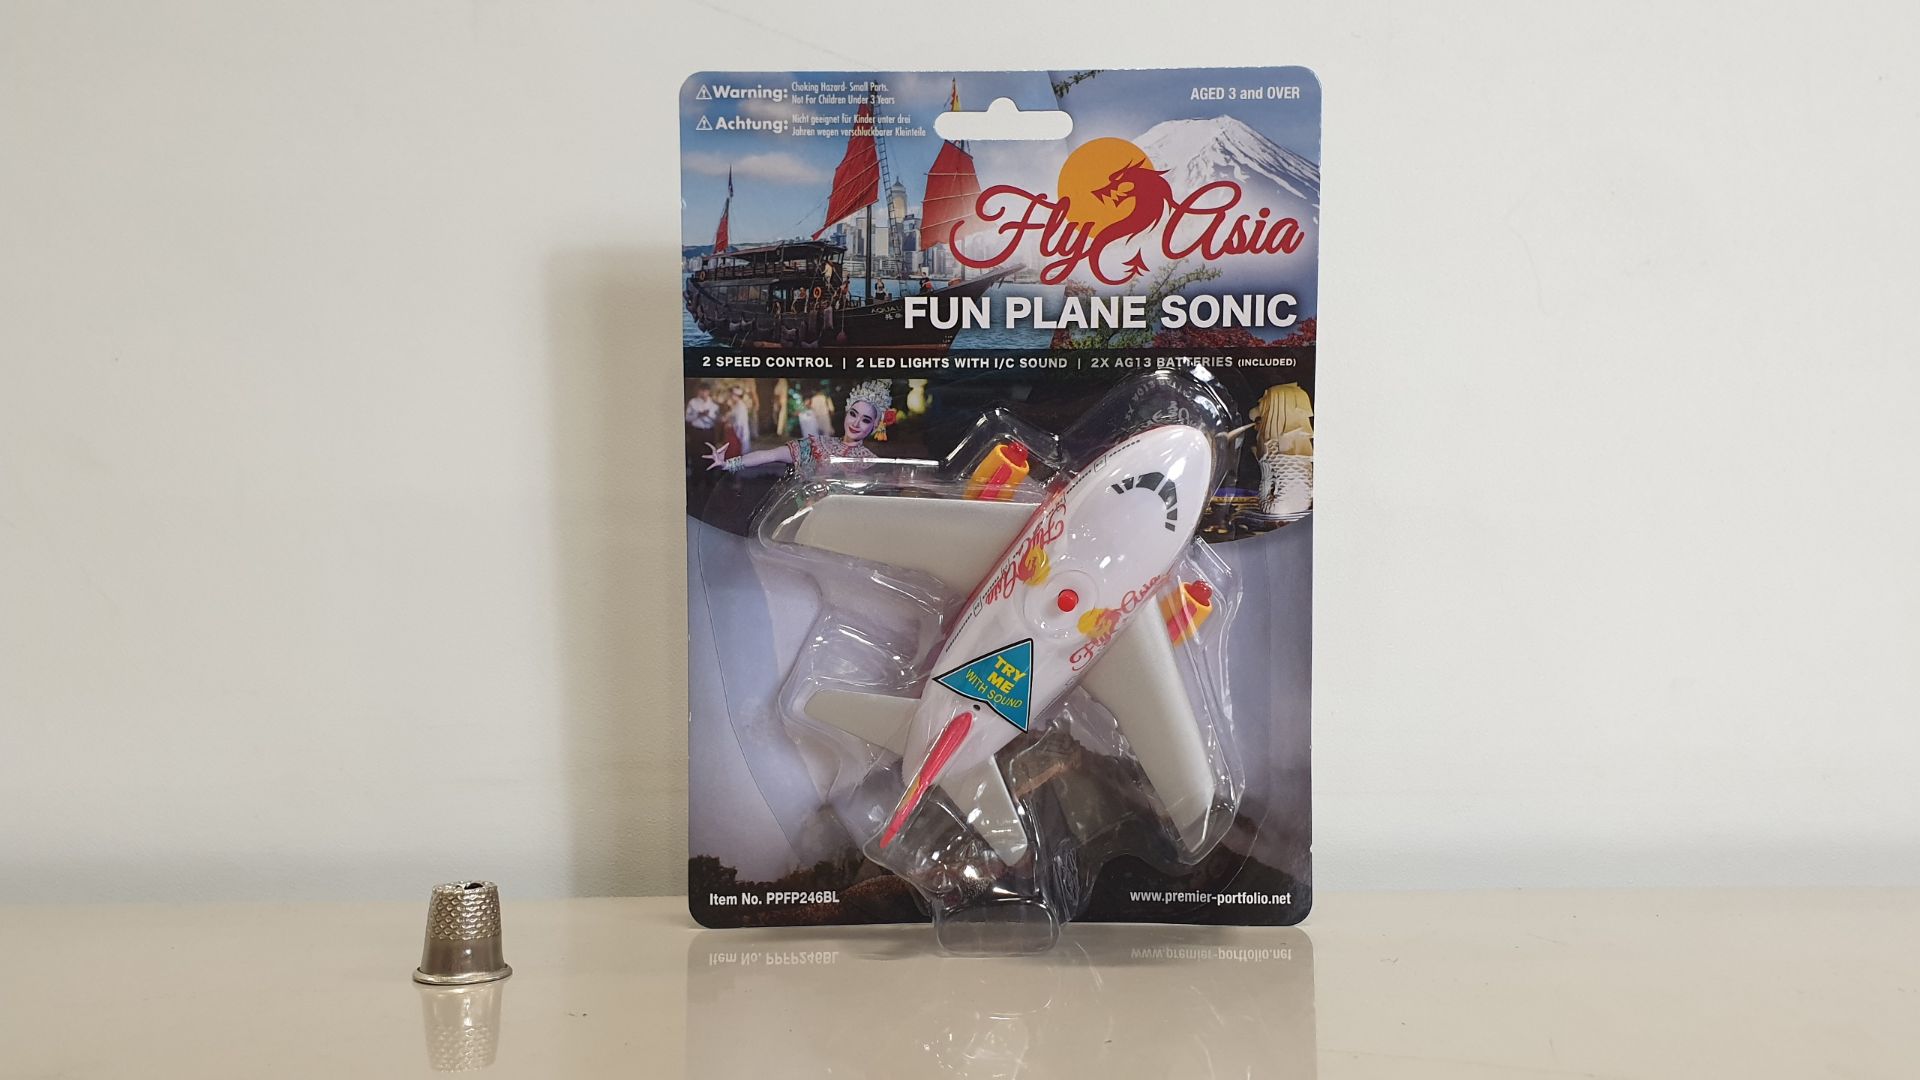 48 XFLY ASIA FUN PLANE SONIC (PPFP246BL) RRP £19 - IN ONE BOX